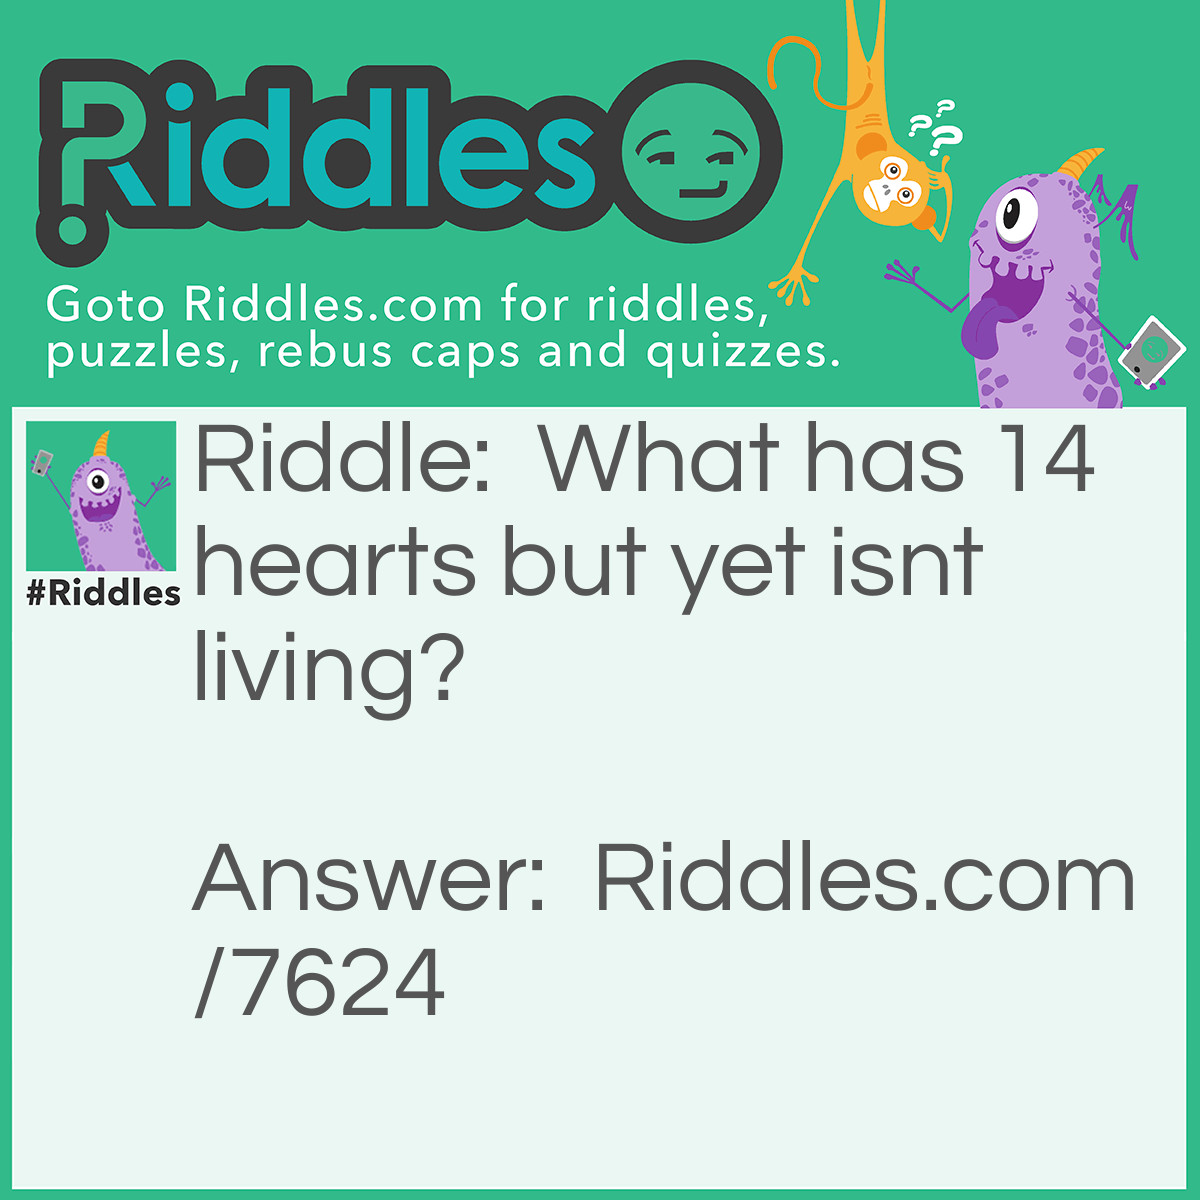 Riddle: What has 14 hearts but yet isn't living? Answer: A deck of cards.